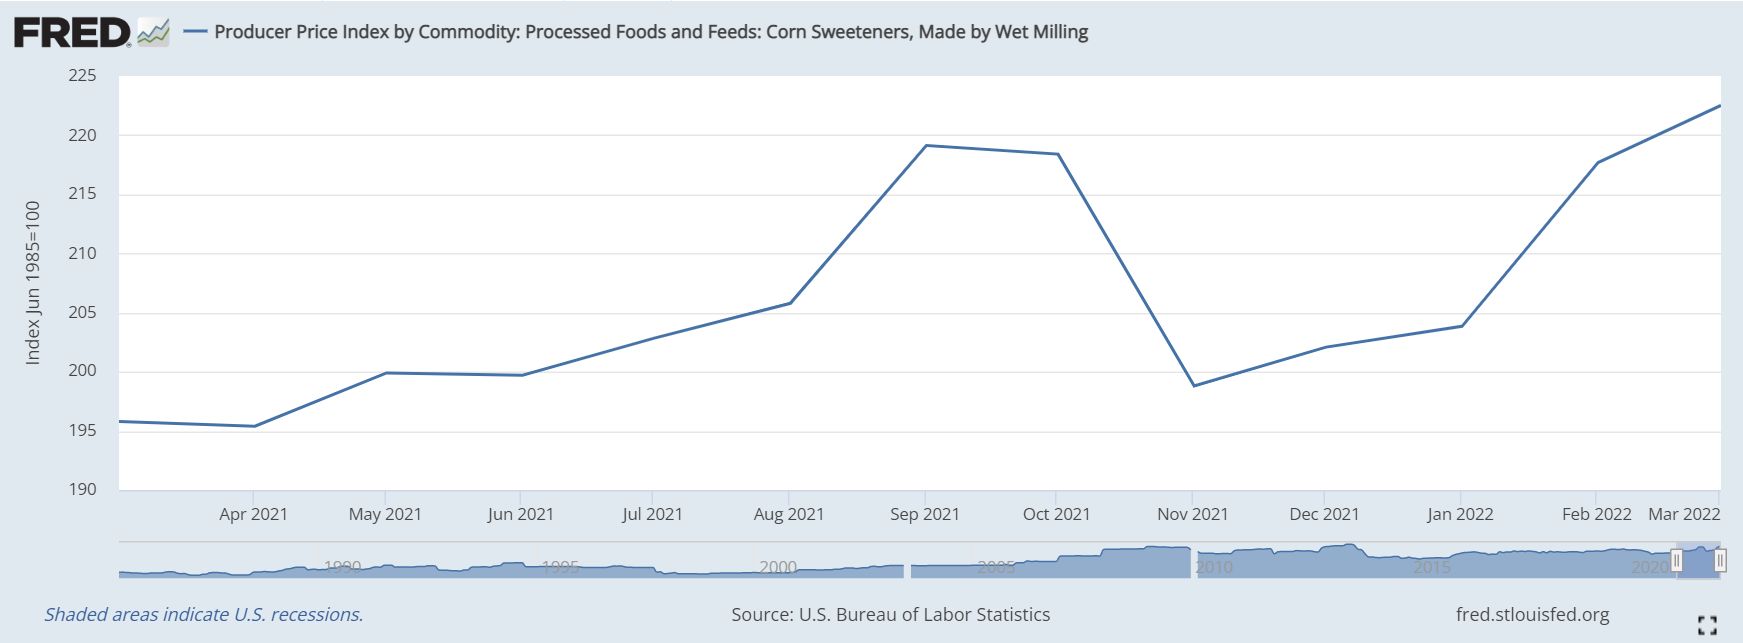 Corn sweeteners made by wet milling April 2022